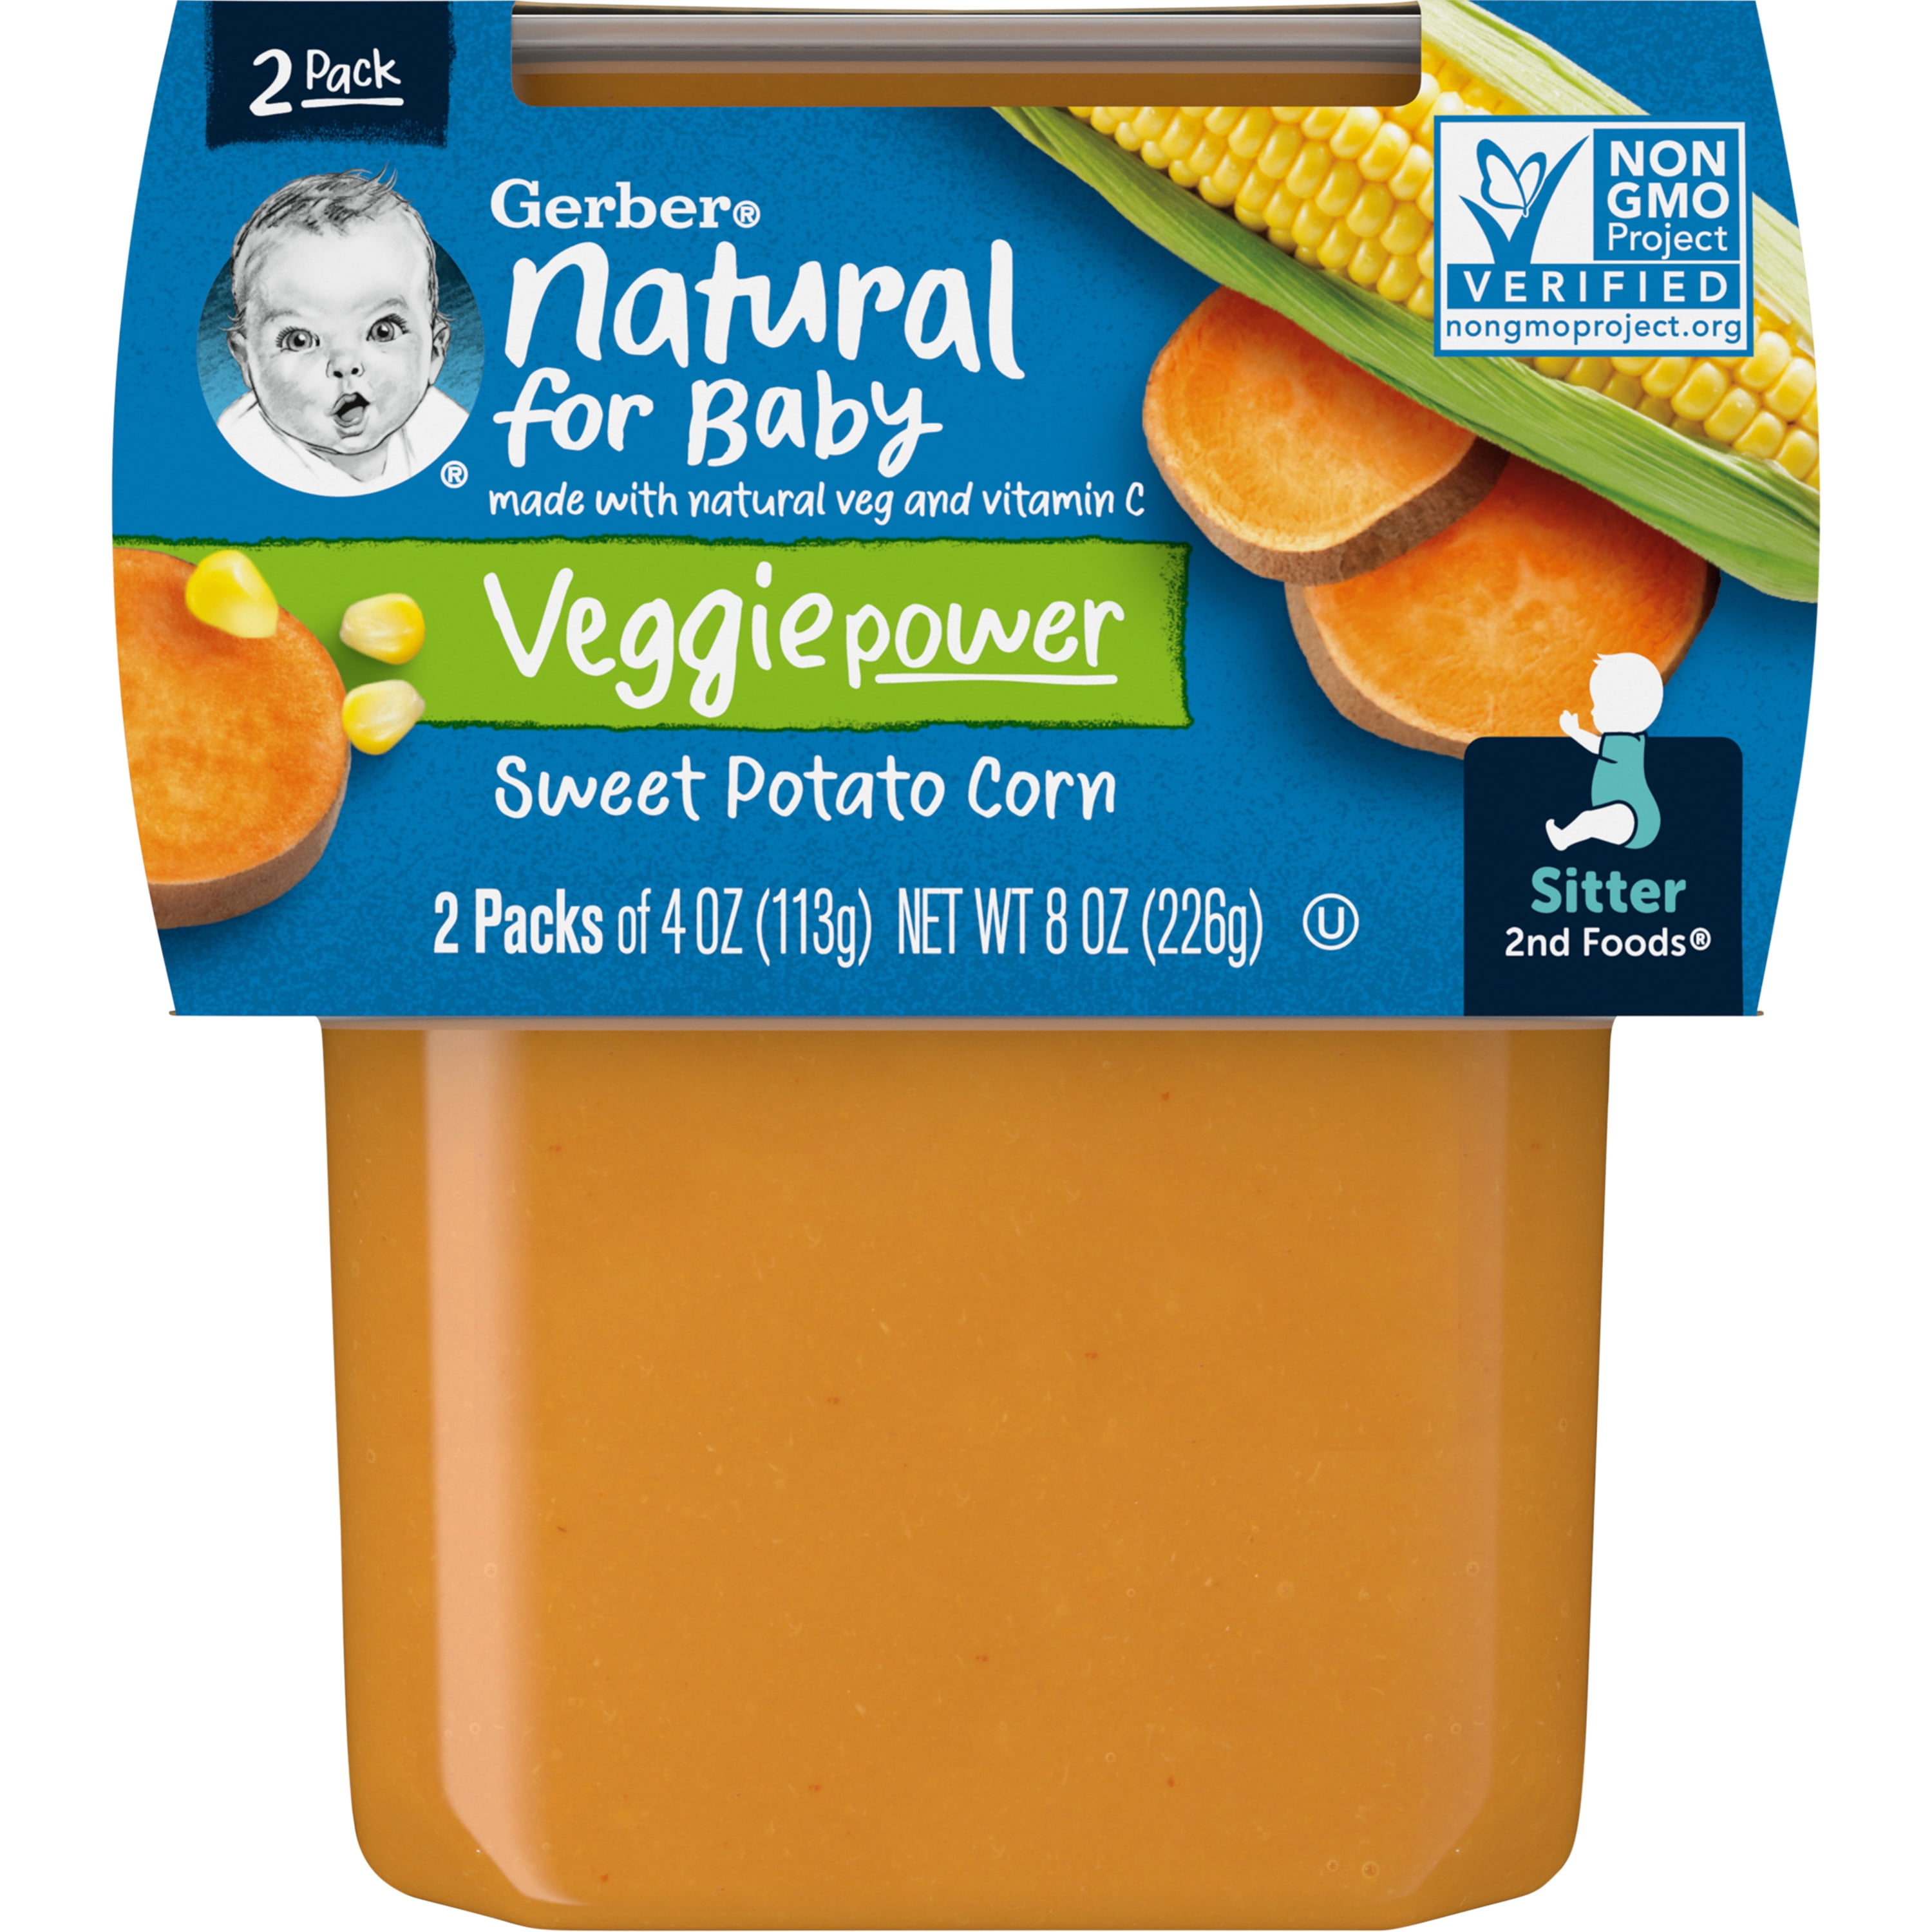 Gerber 2nd Foods Natural for Baby Veggie Power Baby Food, Sweet Potato Corn, 4 oz Tubs (2 Pack)